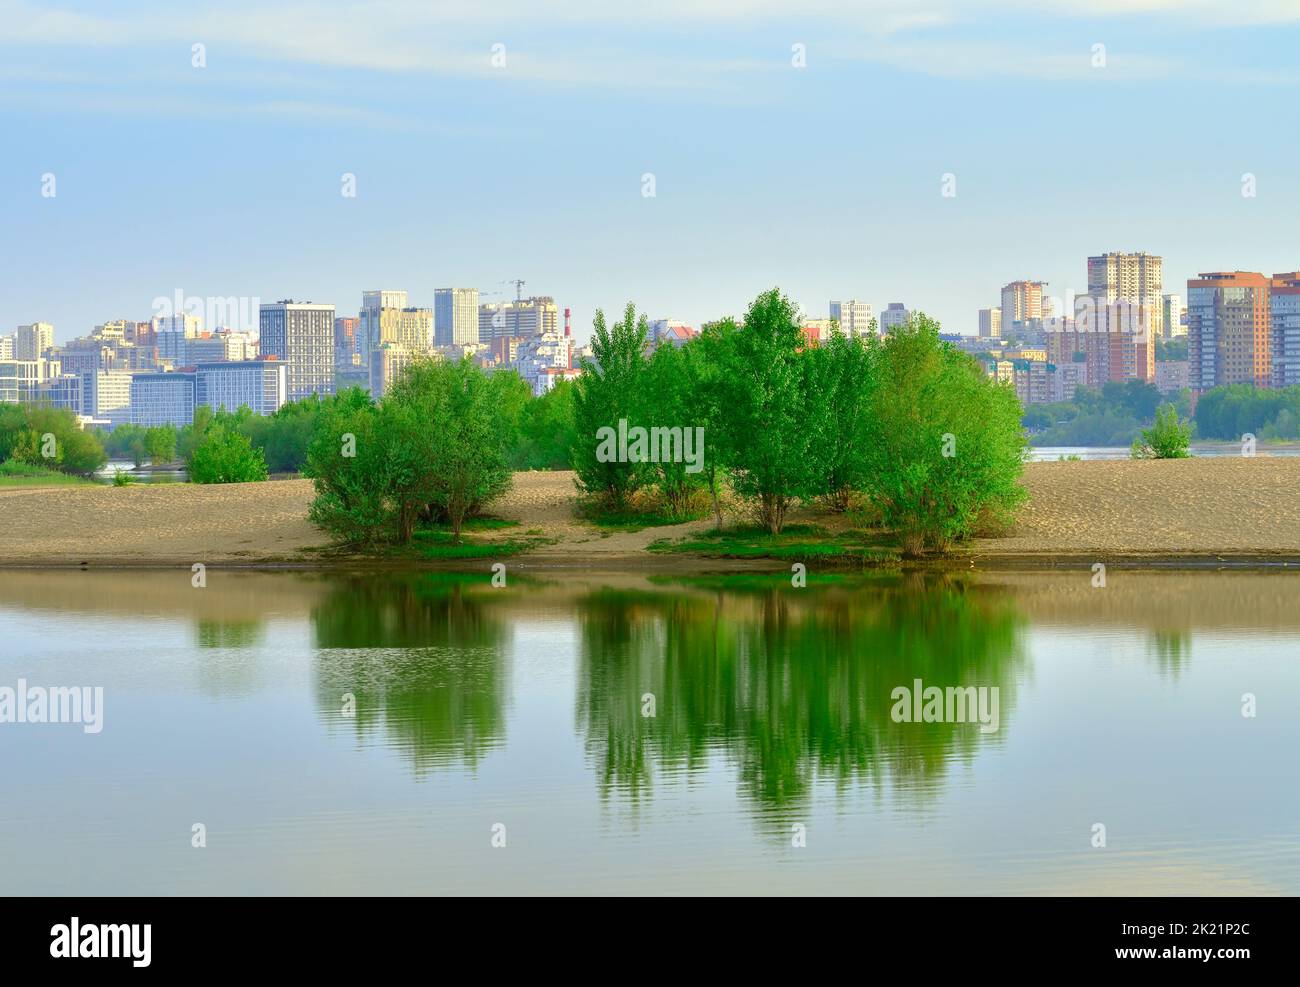 Sandy island on the Ob. Reflection of trees in the water of a river on the outskirts of a big city. Novosibirsk, Siberia, Russia, 2022 Stock Photo